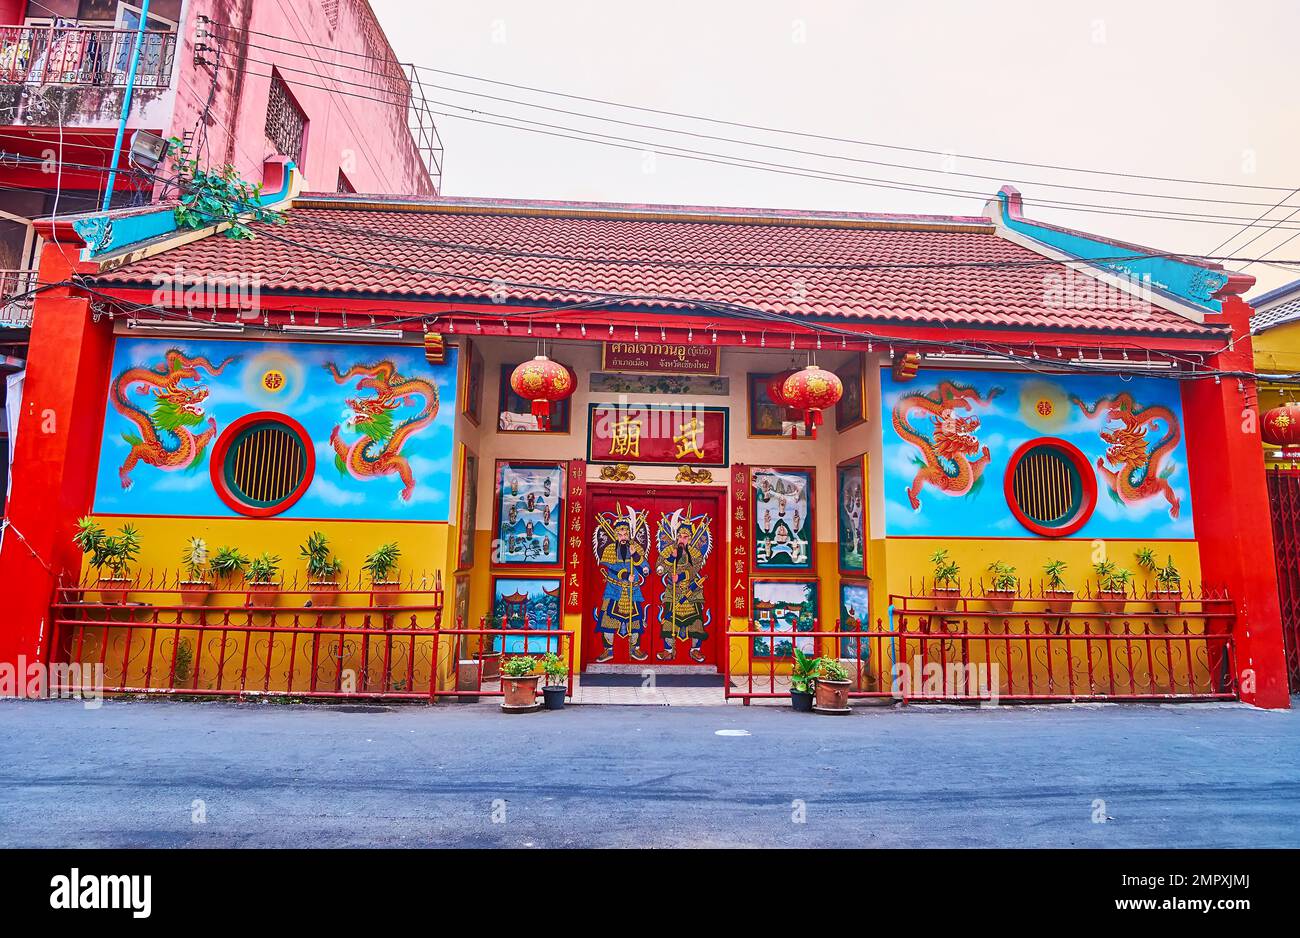 The painted facade of the Guan Yu Shrine, located on Kuang Men Road, Chinatown, Chiang Mai, Thailand Stock Photo